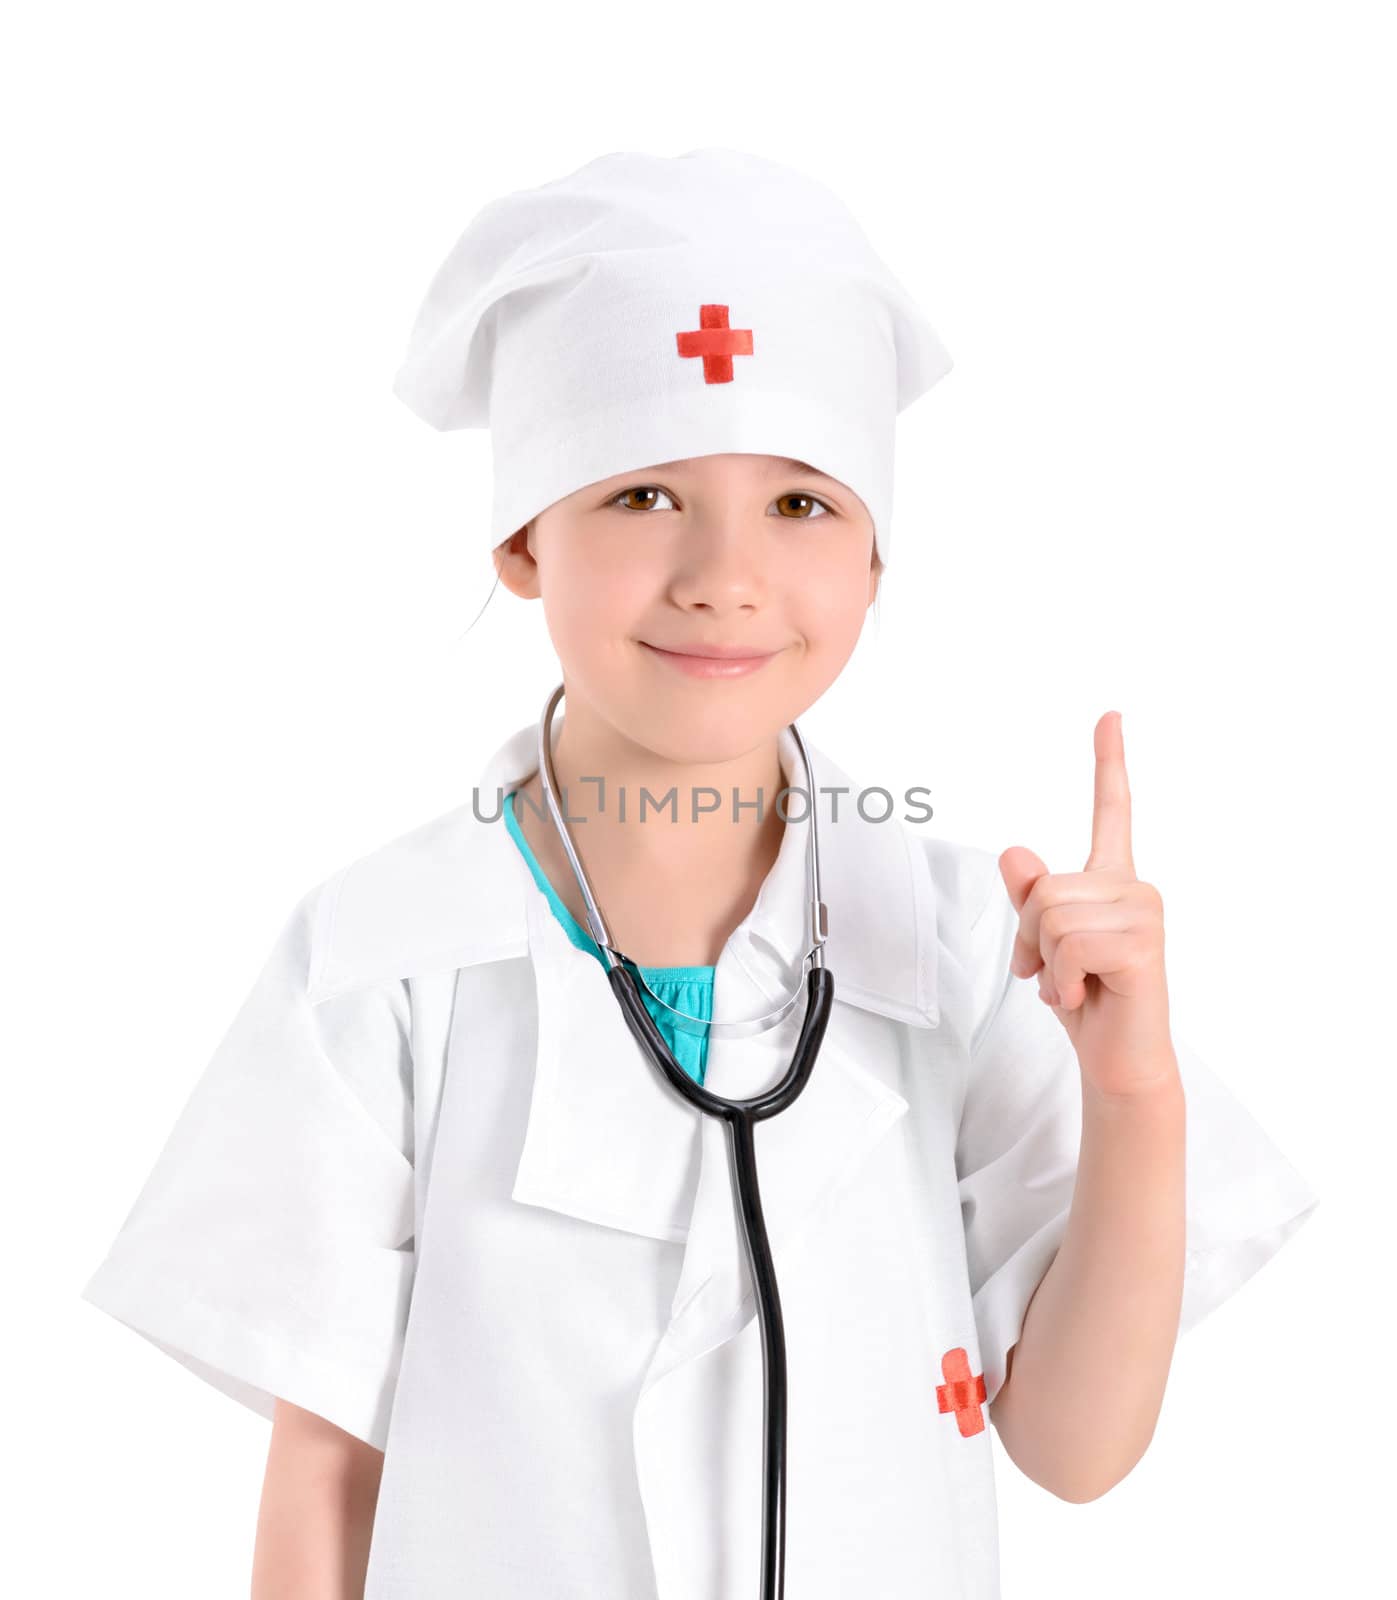 Portrait of a smiling little girl wearing as a doctor on white uniform, with a stethoscope, while pointing finger up and gives instructions. Isolated on white background.